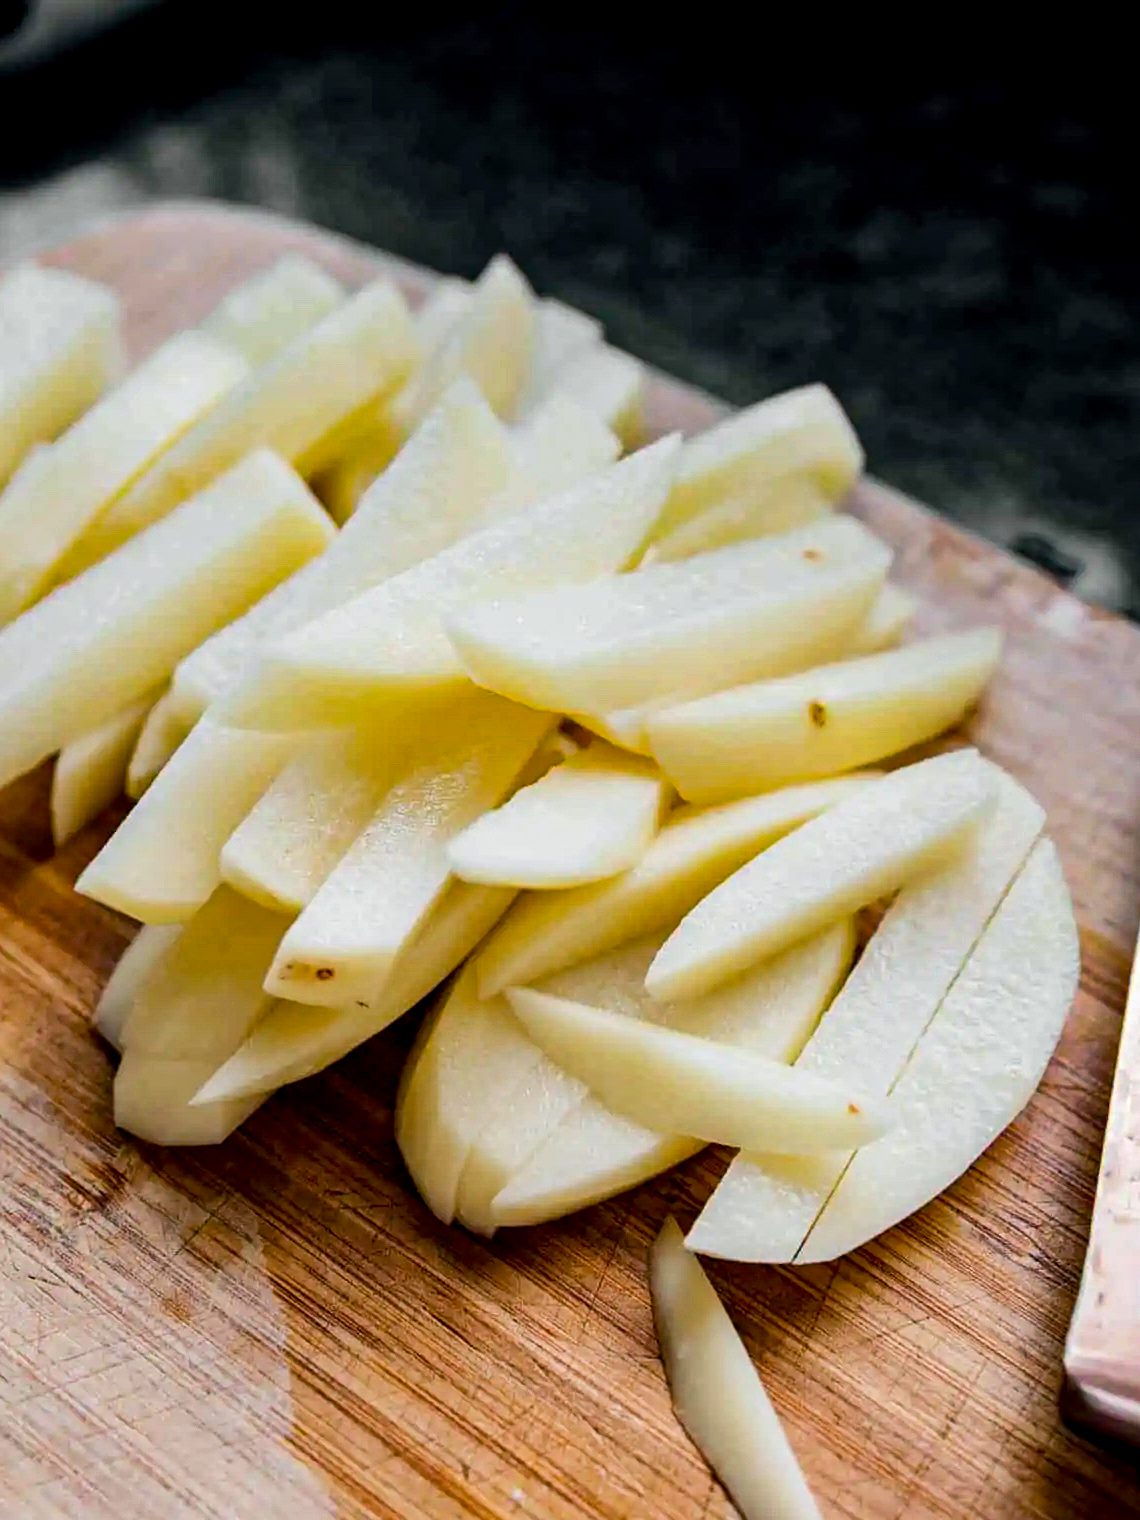 Slice your peeled potatoes into thin cuts